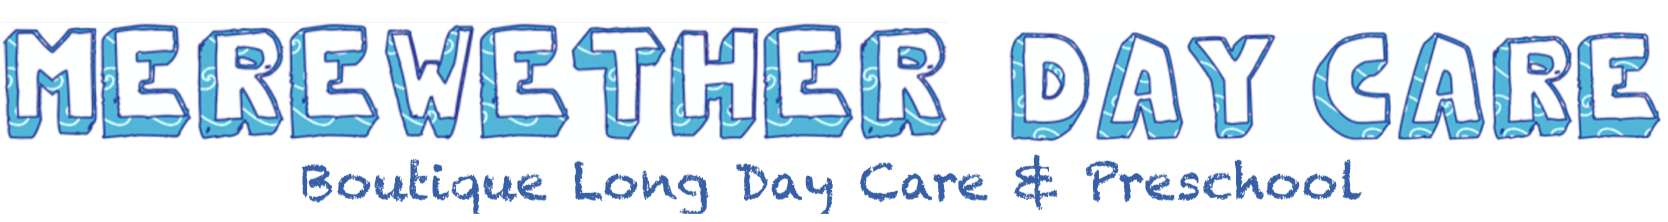 Merewether Day Care